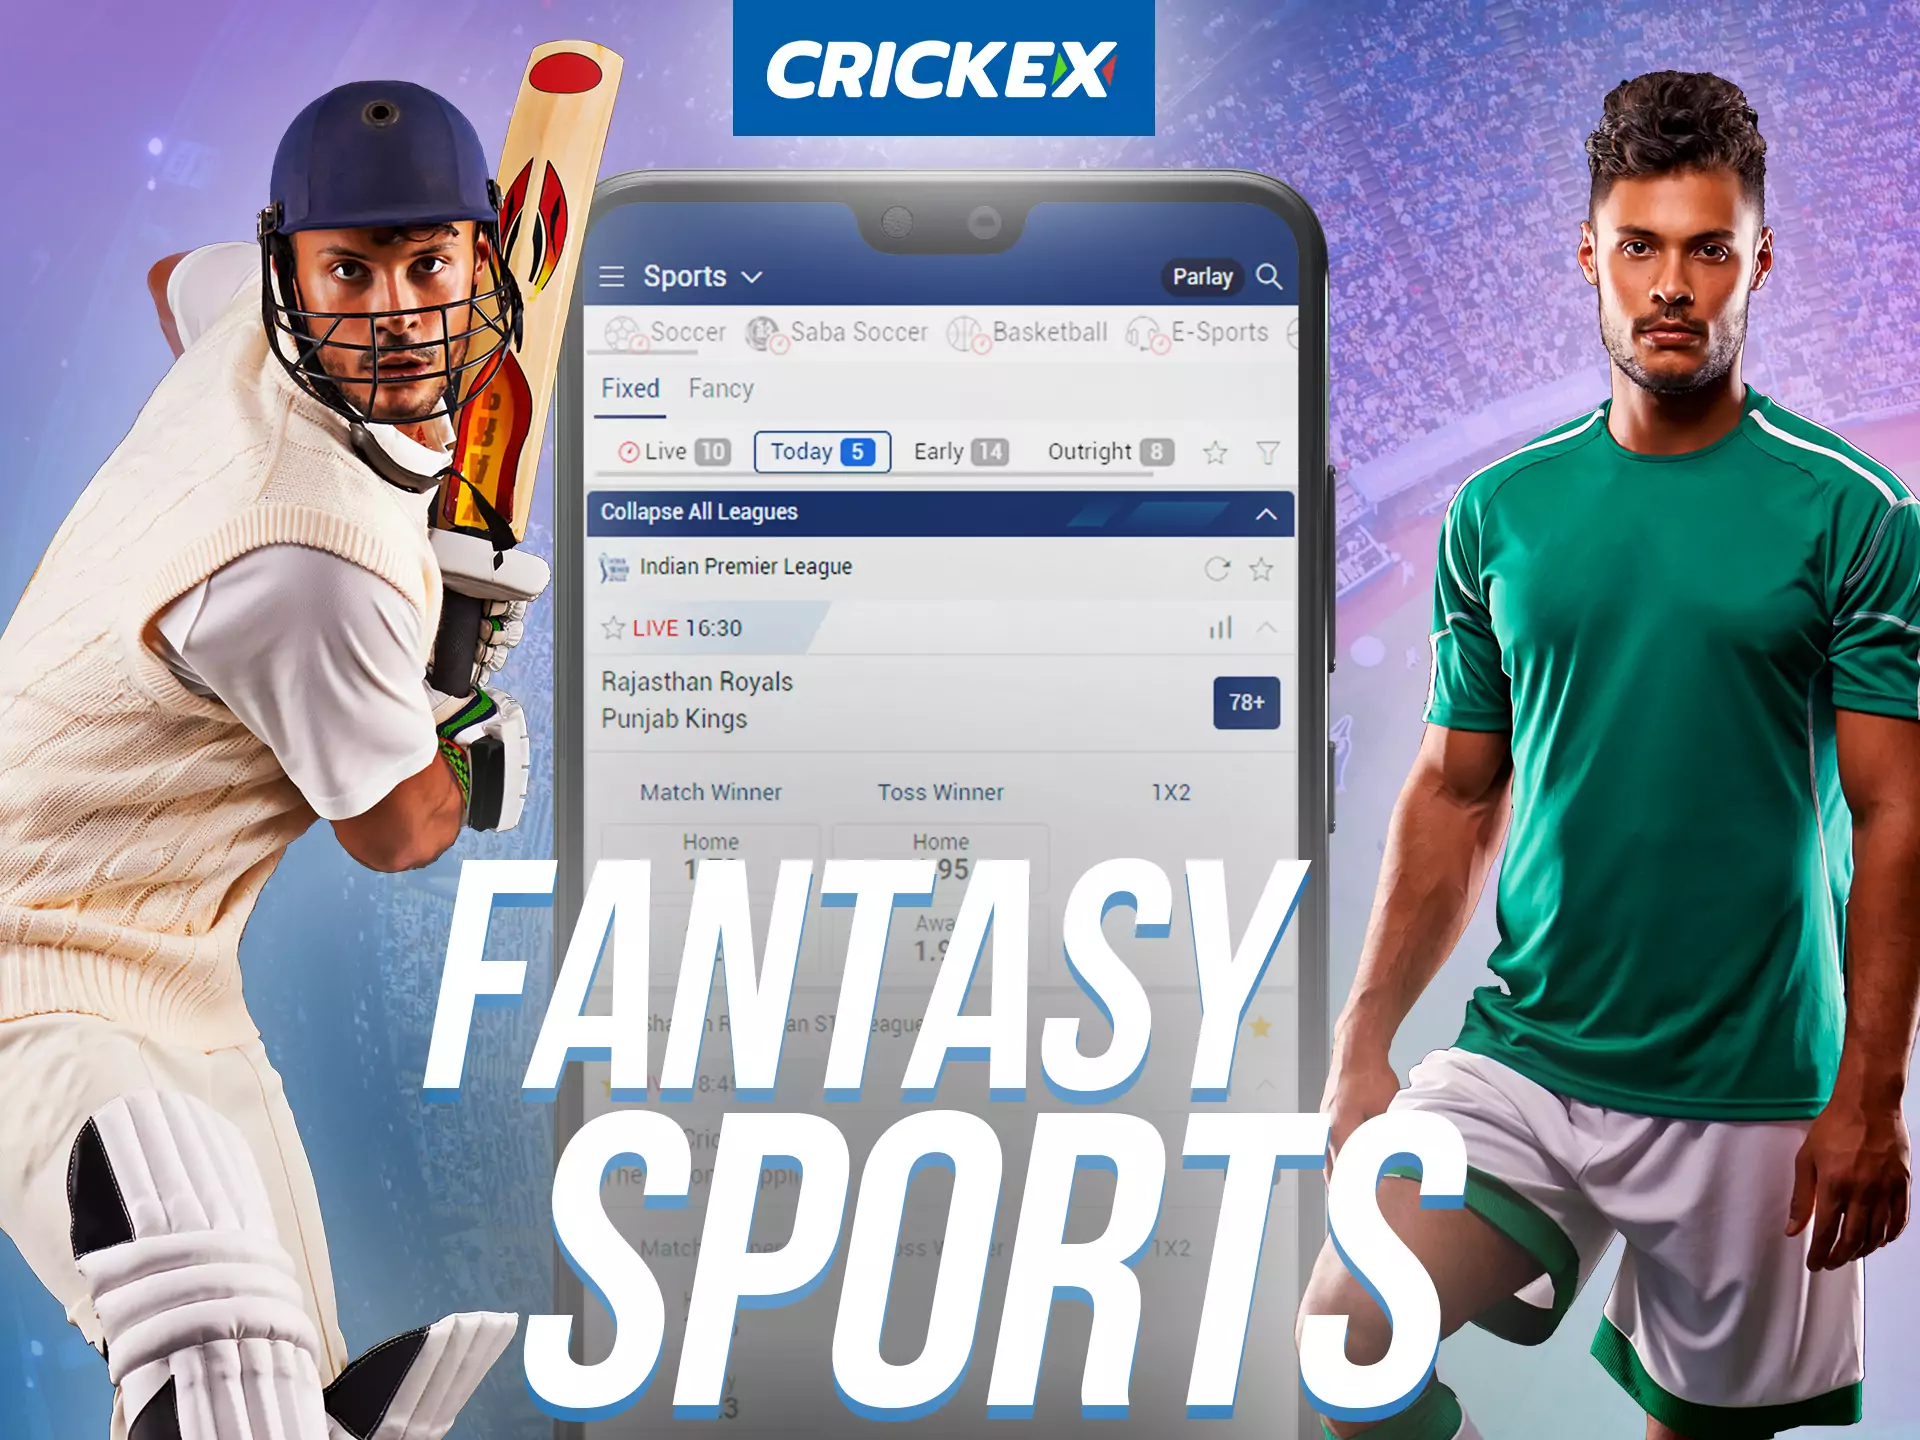 With the Crickex app, bet on fantasy sports.